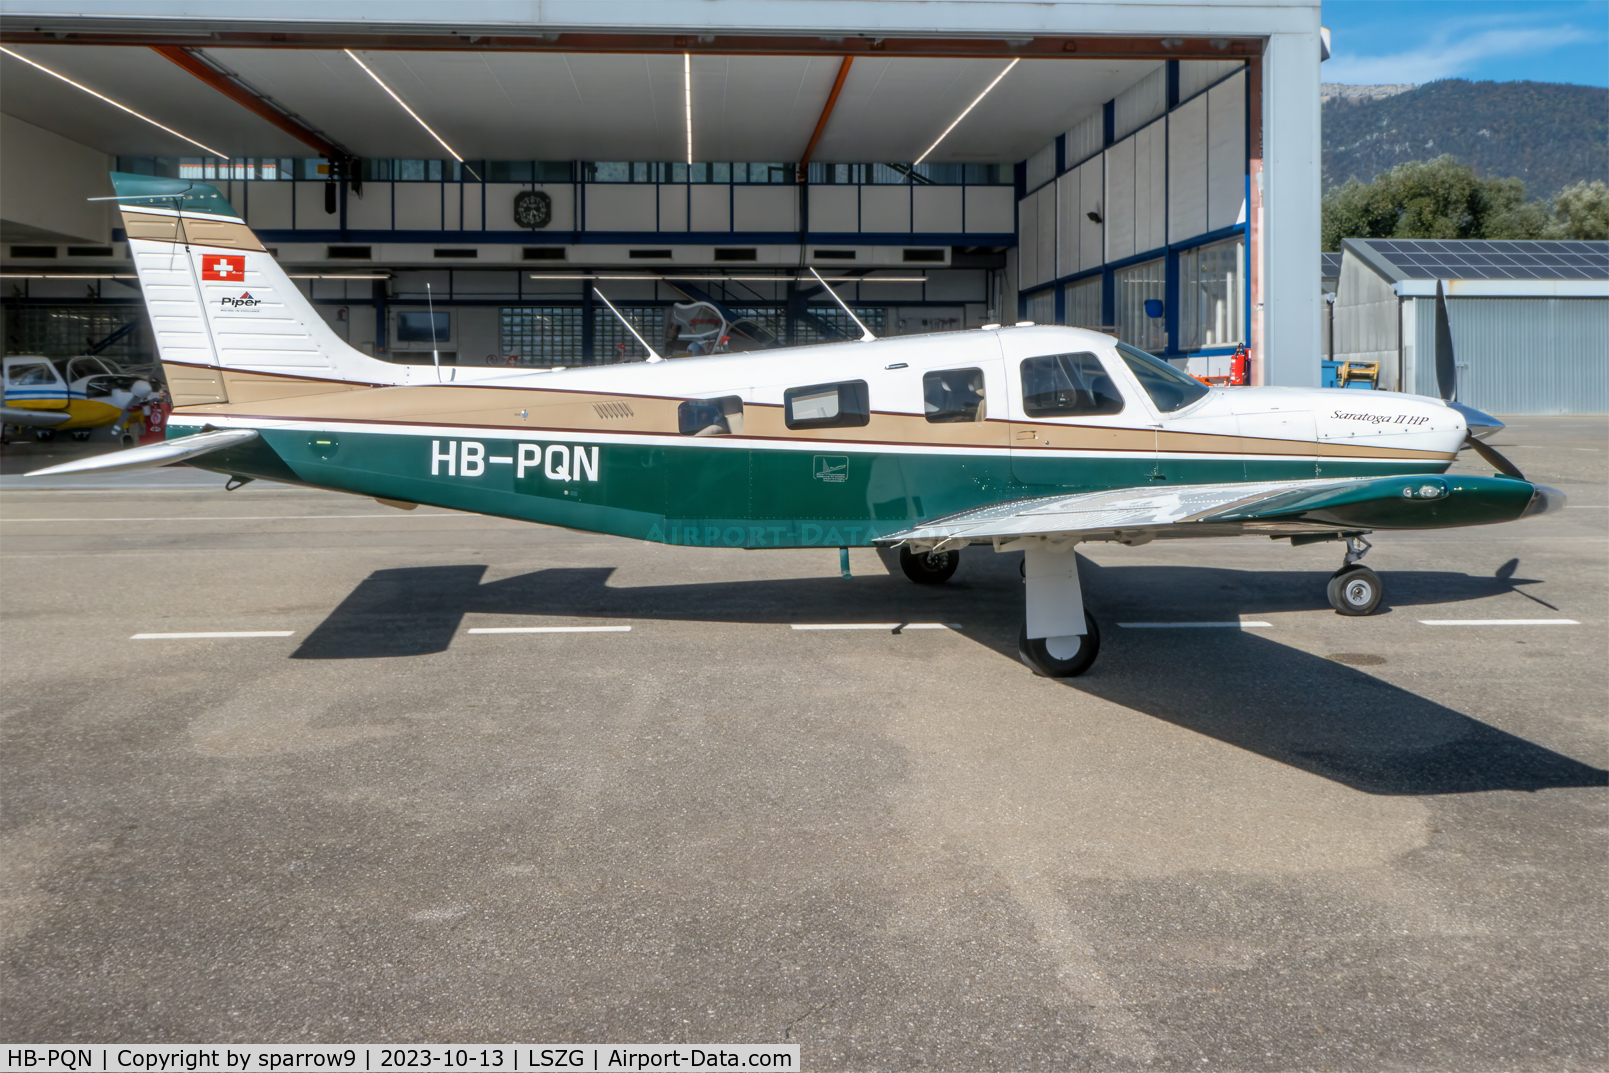 HB-PQN, 1998 Piper PA-32R-301 Saratoga C/N 3246119, At Grenchen. HB-registered since 2003-05-21